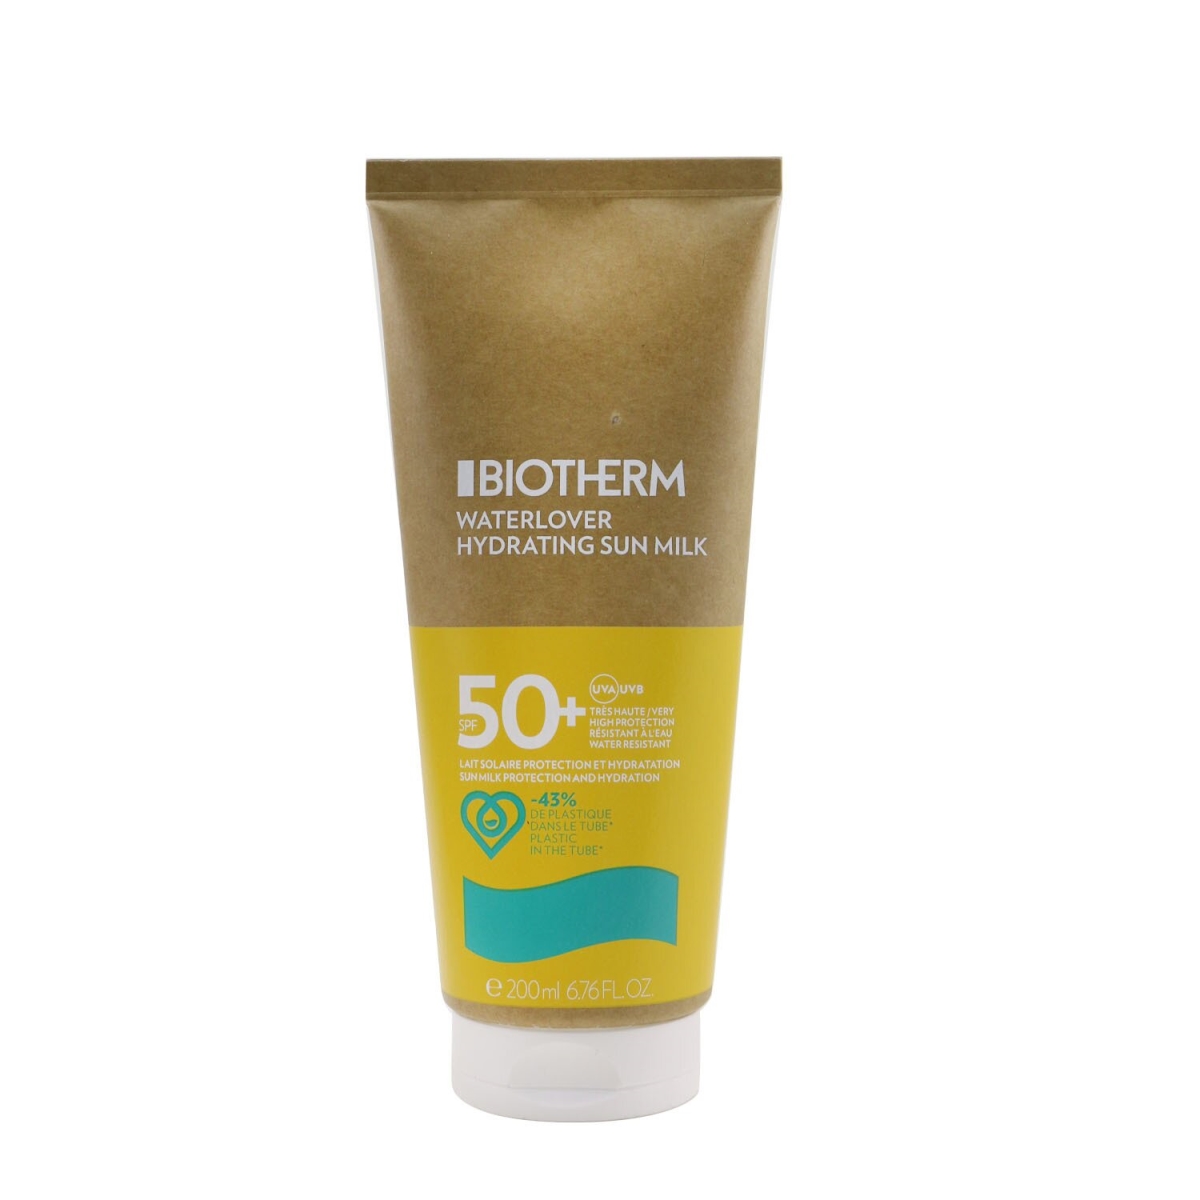 Picture of Biotherm 262254 6.76 oz Waterlover Hydrating SPF 50 Sun Milk